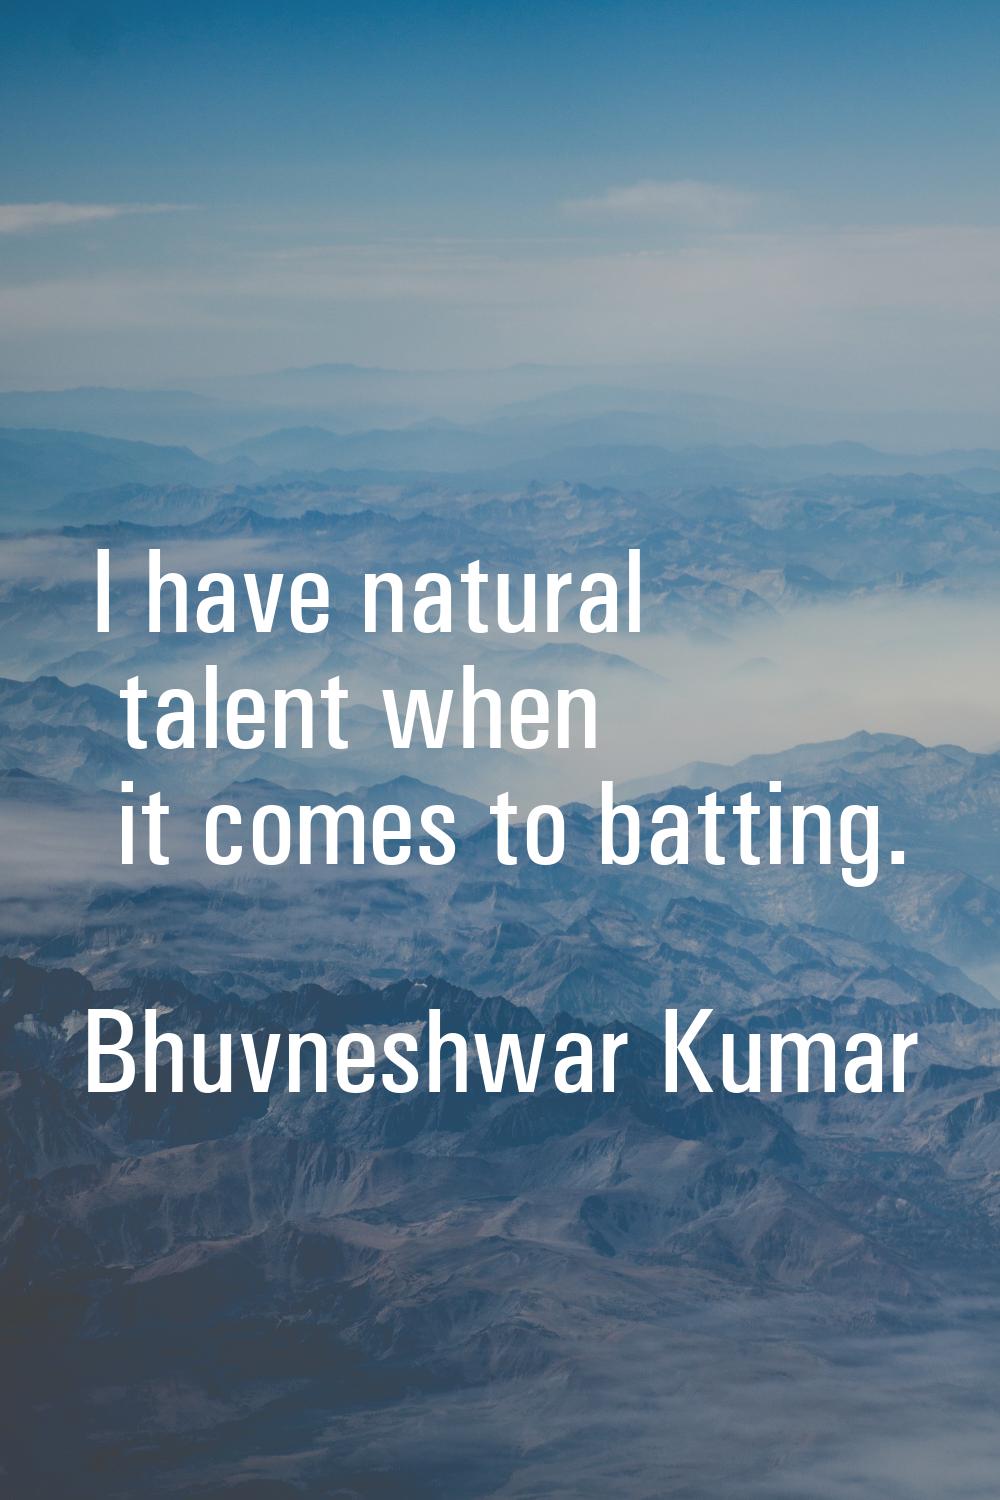 I have natural talent when it comes to batting.